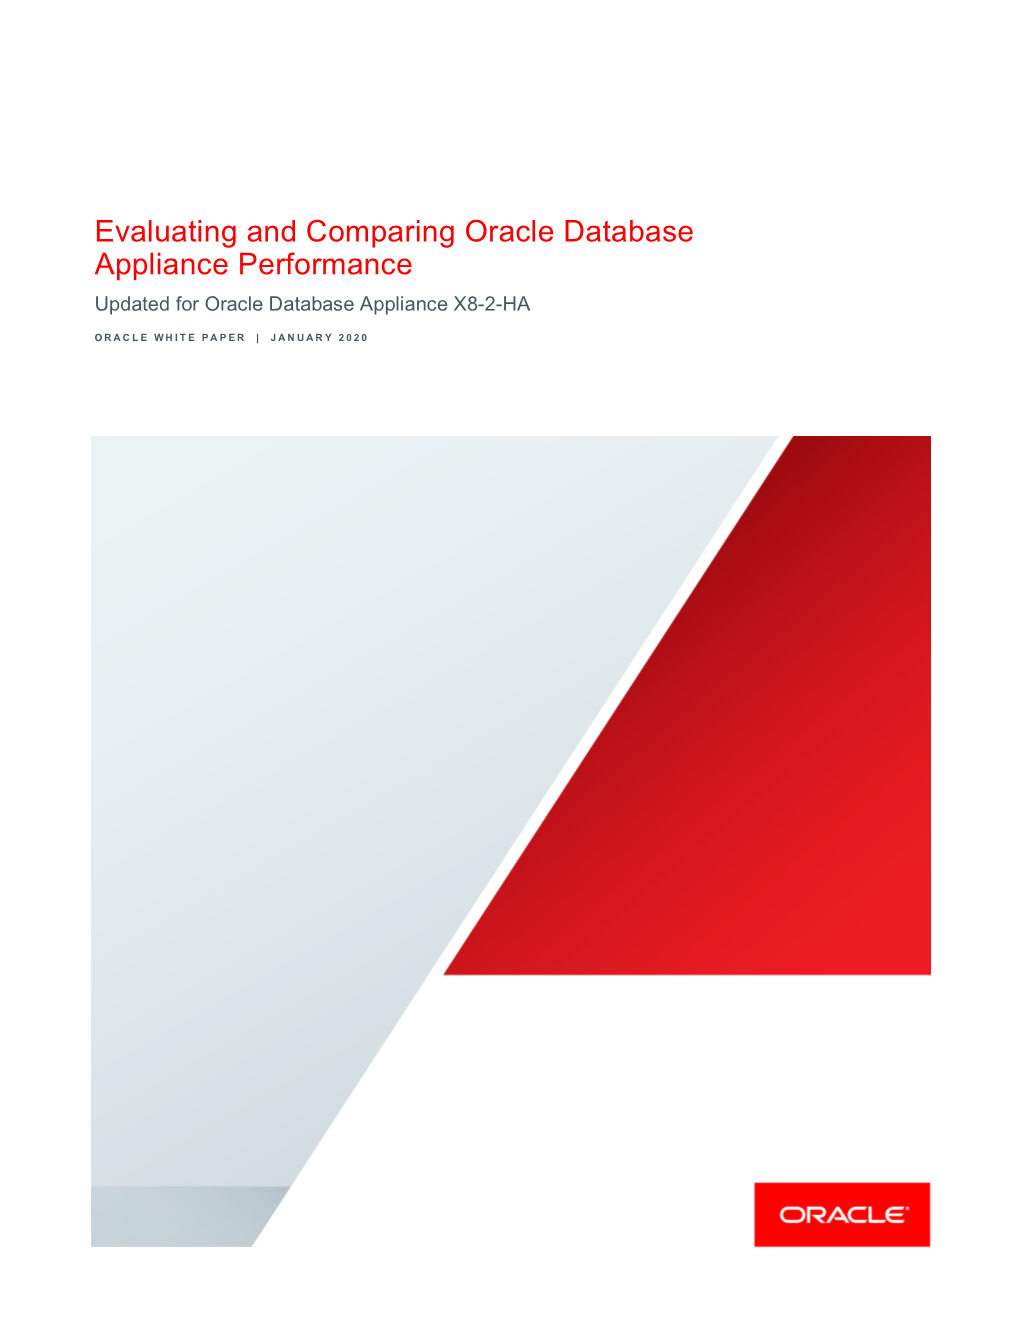 Evaluating and Comparing Oracle Database Appliance Performance Updated for Oracle Database Appliance X8-2-HA